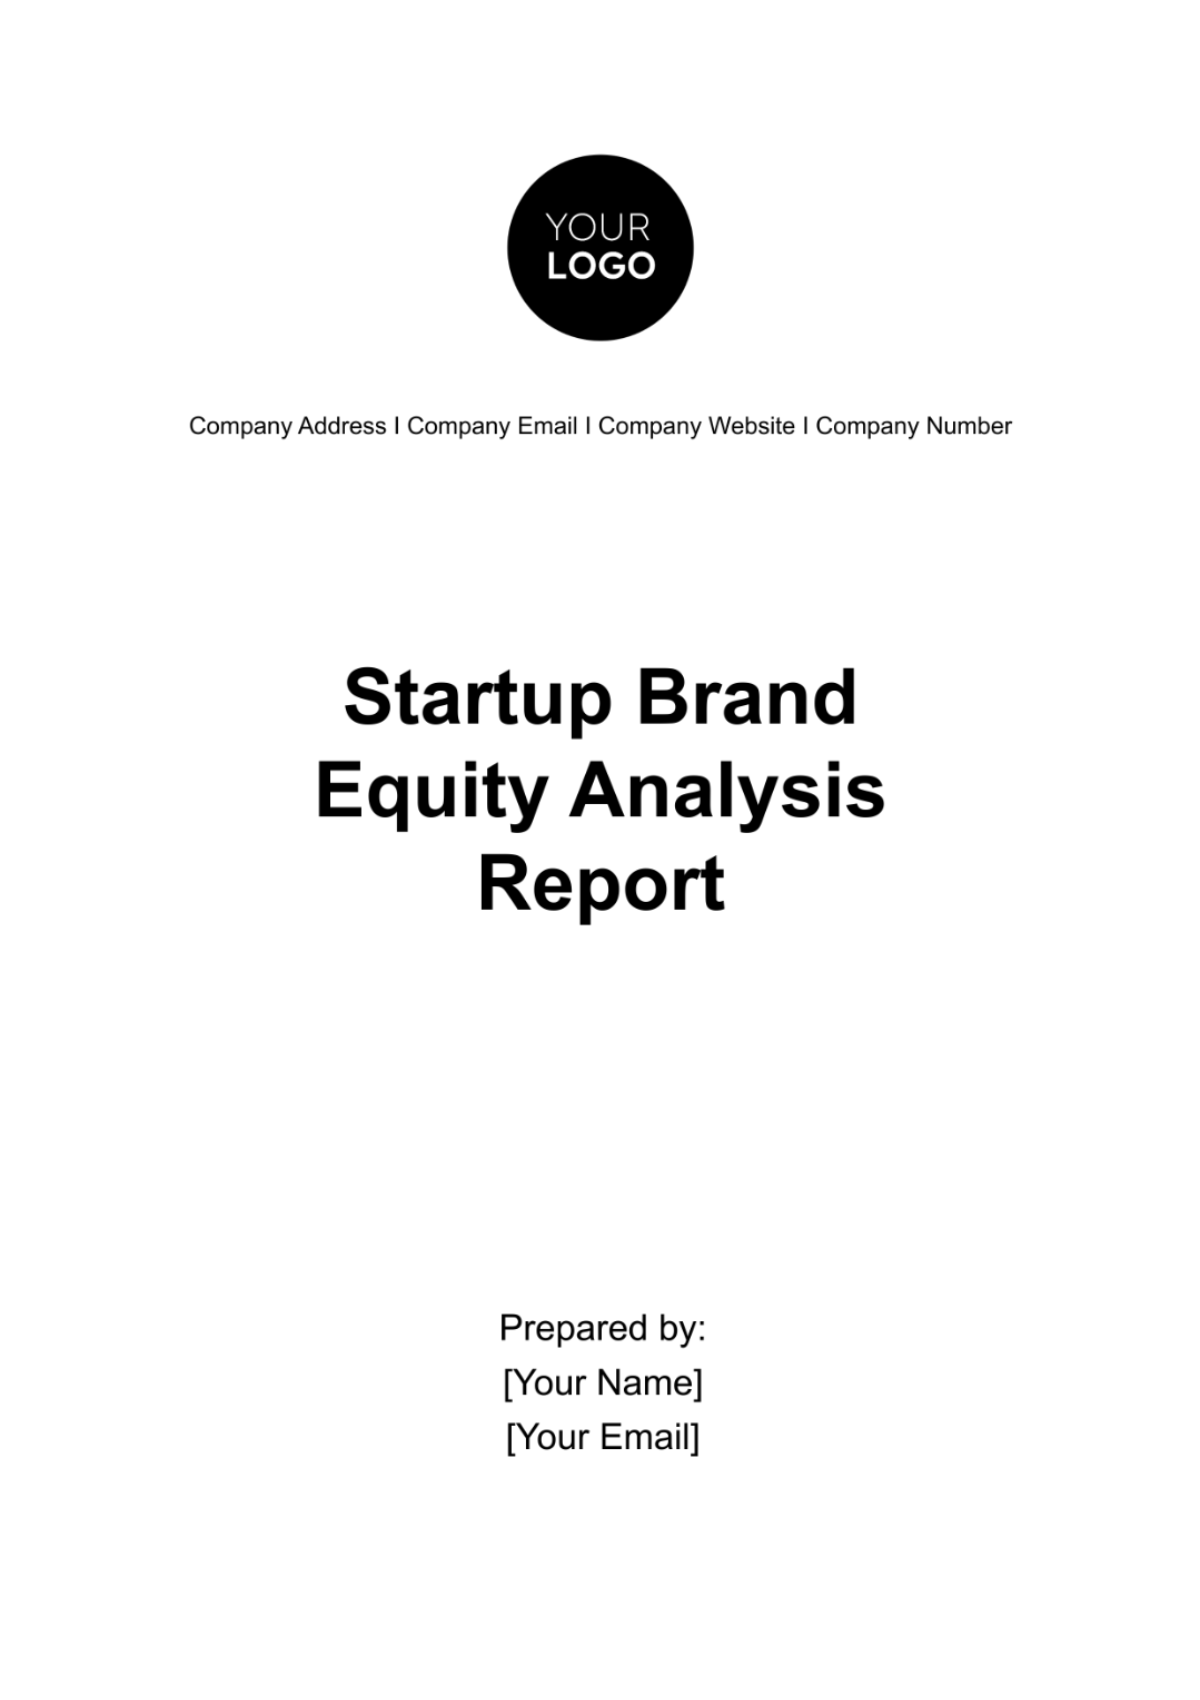 Startup Brand Equity Analysis Report Template